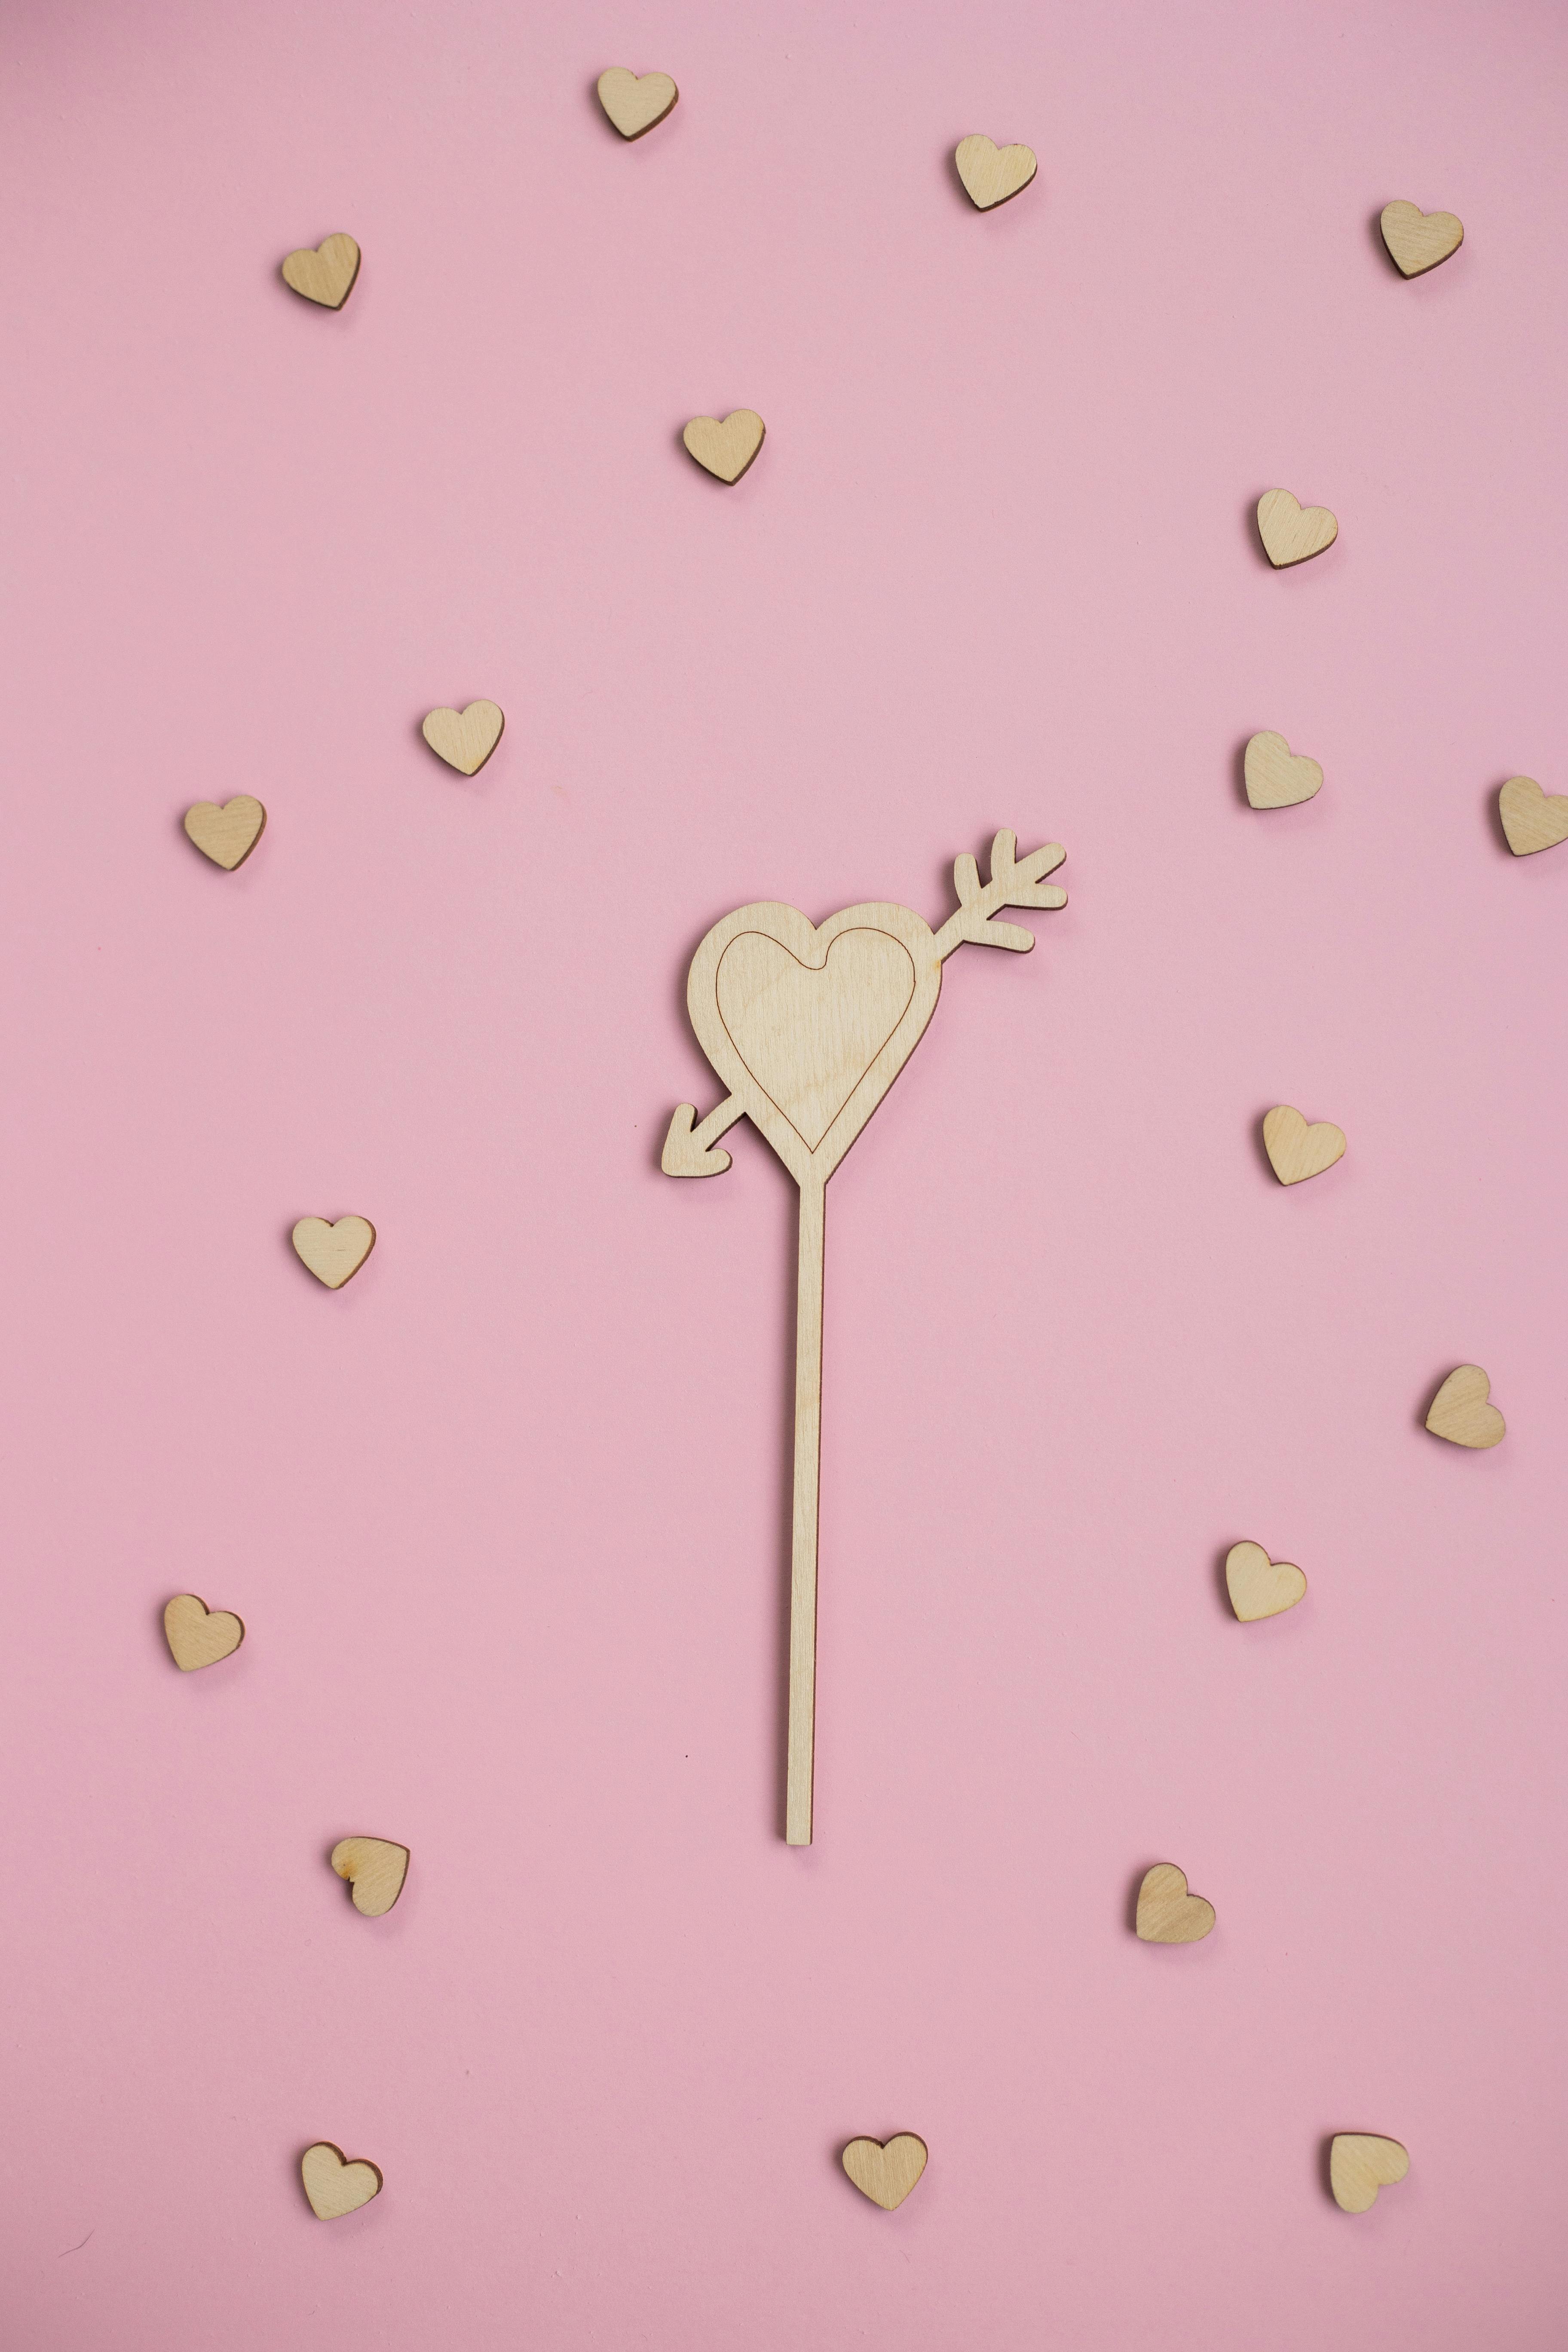 Creative Wooden Hearts Against Pink Background · Free Stock Photo